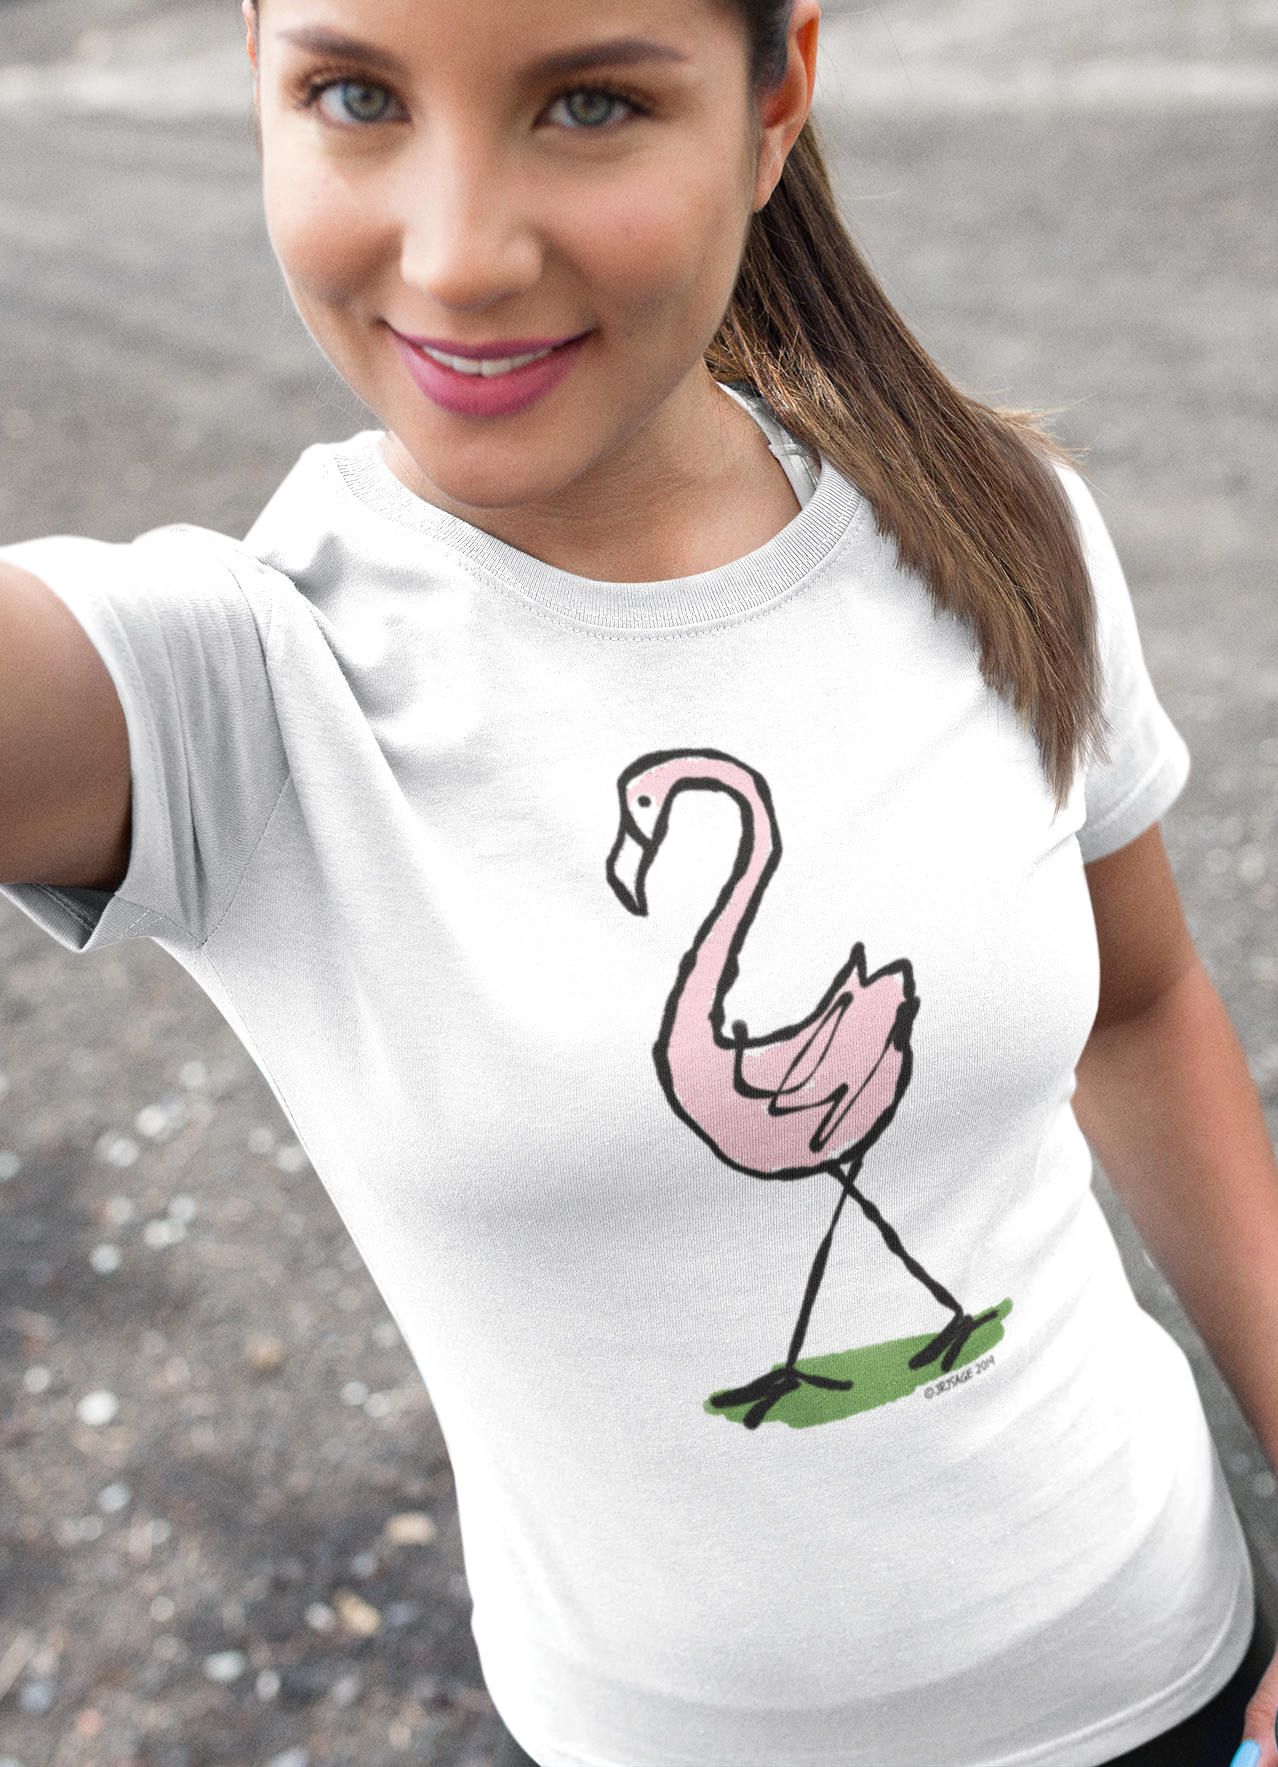 Pink Flamingo T-shirt - Young woman wearing an illustrated flamingo t-shirt design on a white tee by Hector and Bone